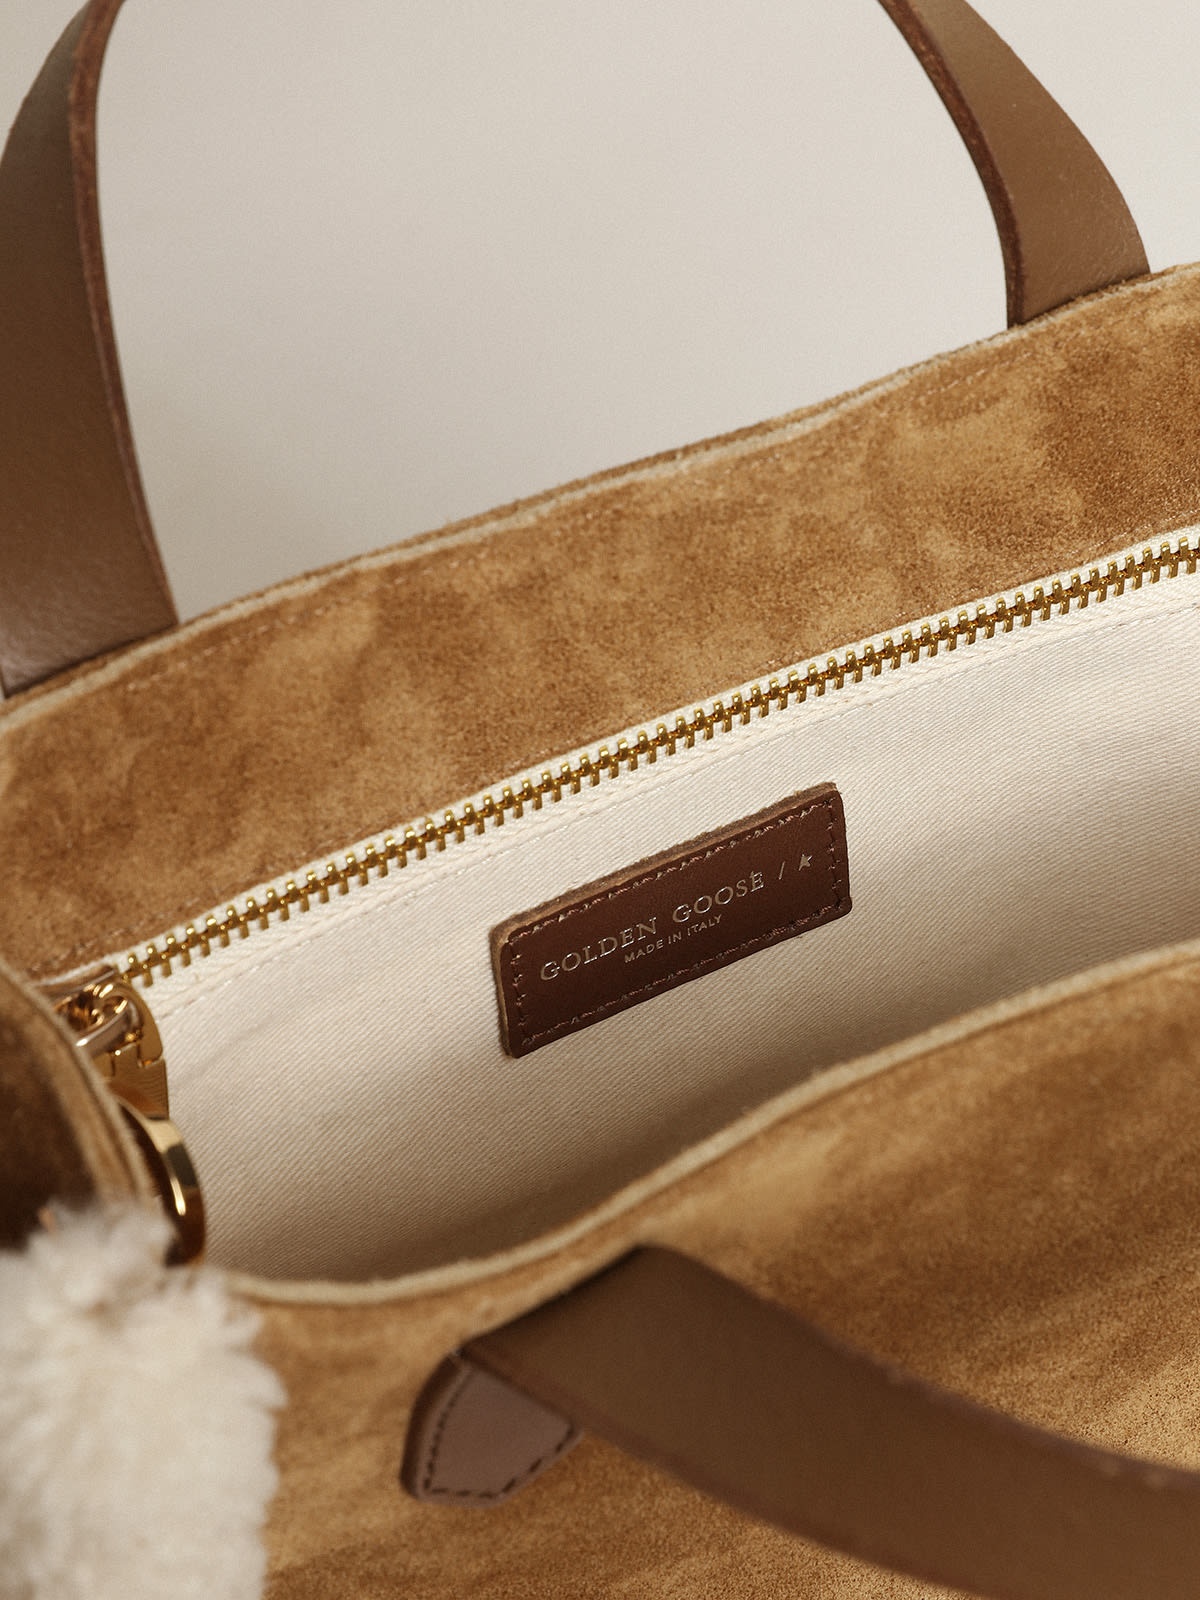 Mini California Bag in suede leather with shearling trim - 5